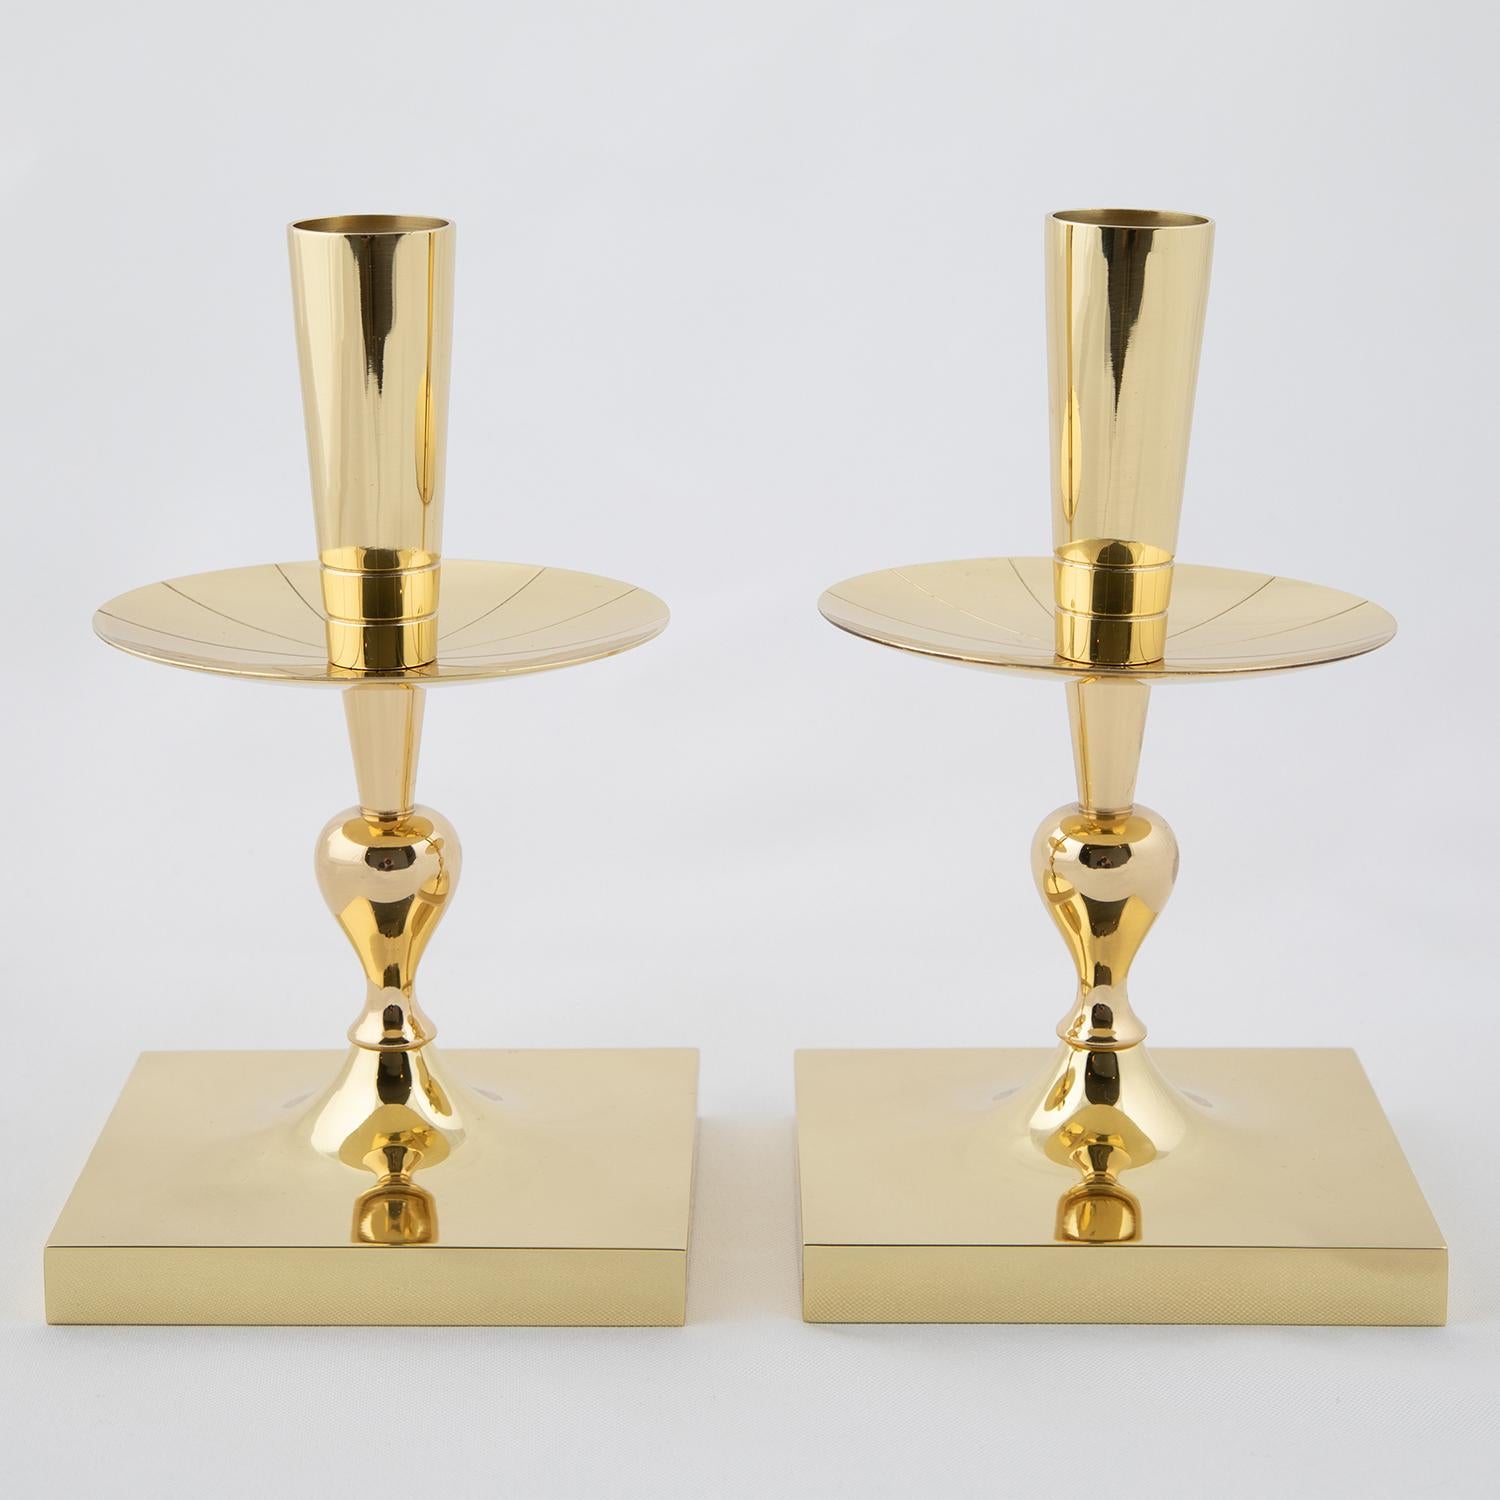 Pair of elegant candelabra, each holding 1 candle, in polished brass with engraved radiating lines, by Tommi Parzinger for Dorlyn Silversmiths, American, 1950's (signed “Dorlyn-Silversmiths”).